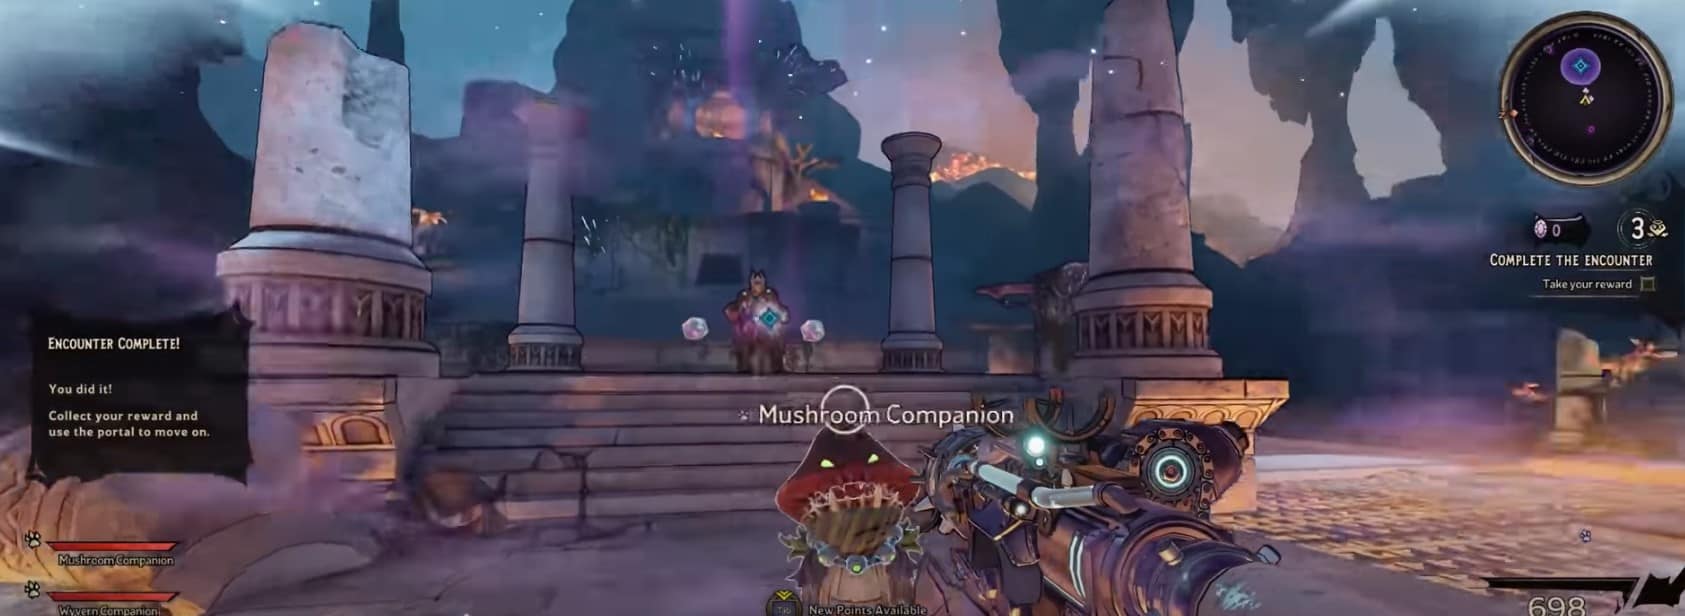 How to Find Secret Raid Bosses in Tiny Tina's Wonderlands